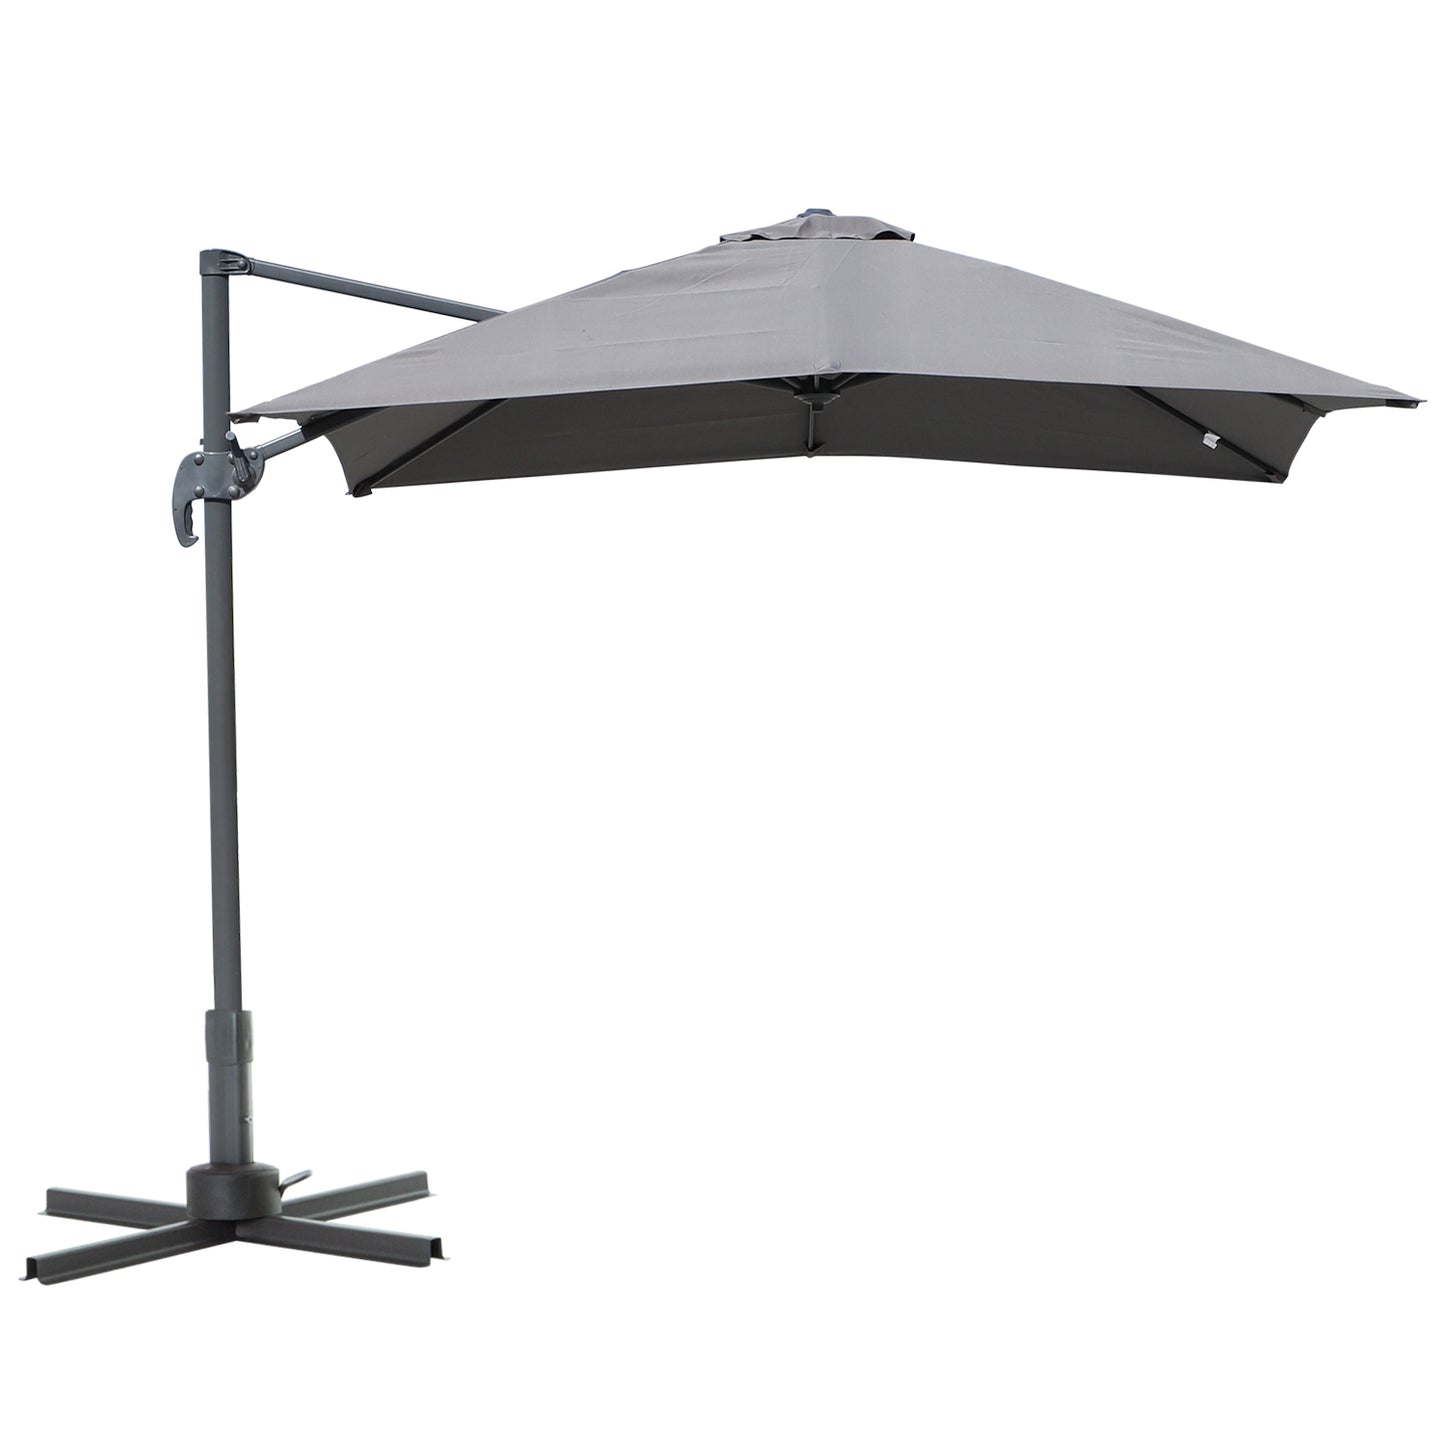 Outsunny 2.5 x 2.5m Patio Offset Parasol Umbrella Cantilever Hanging Aluminium Sun Shade Canopy Shelter 360° Rotation with Crank Handle and Cross Base, Grey